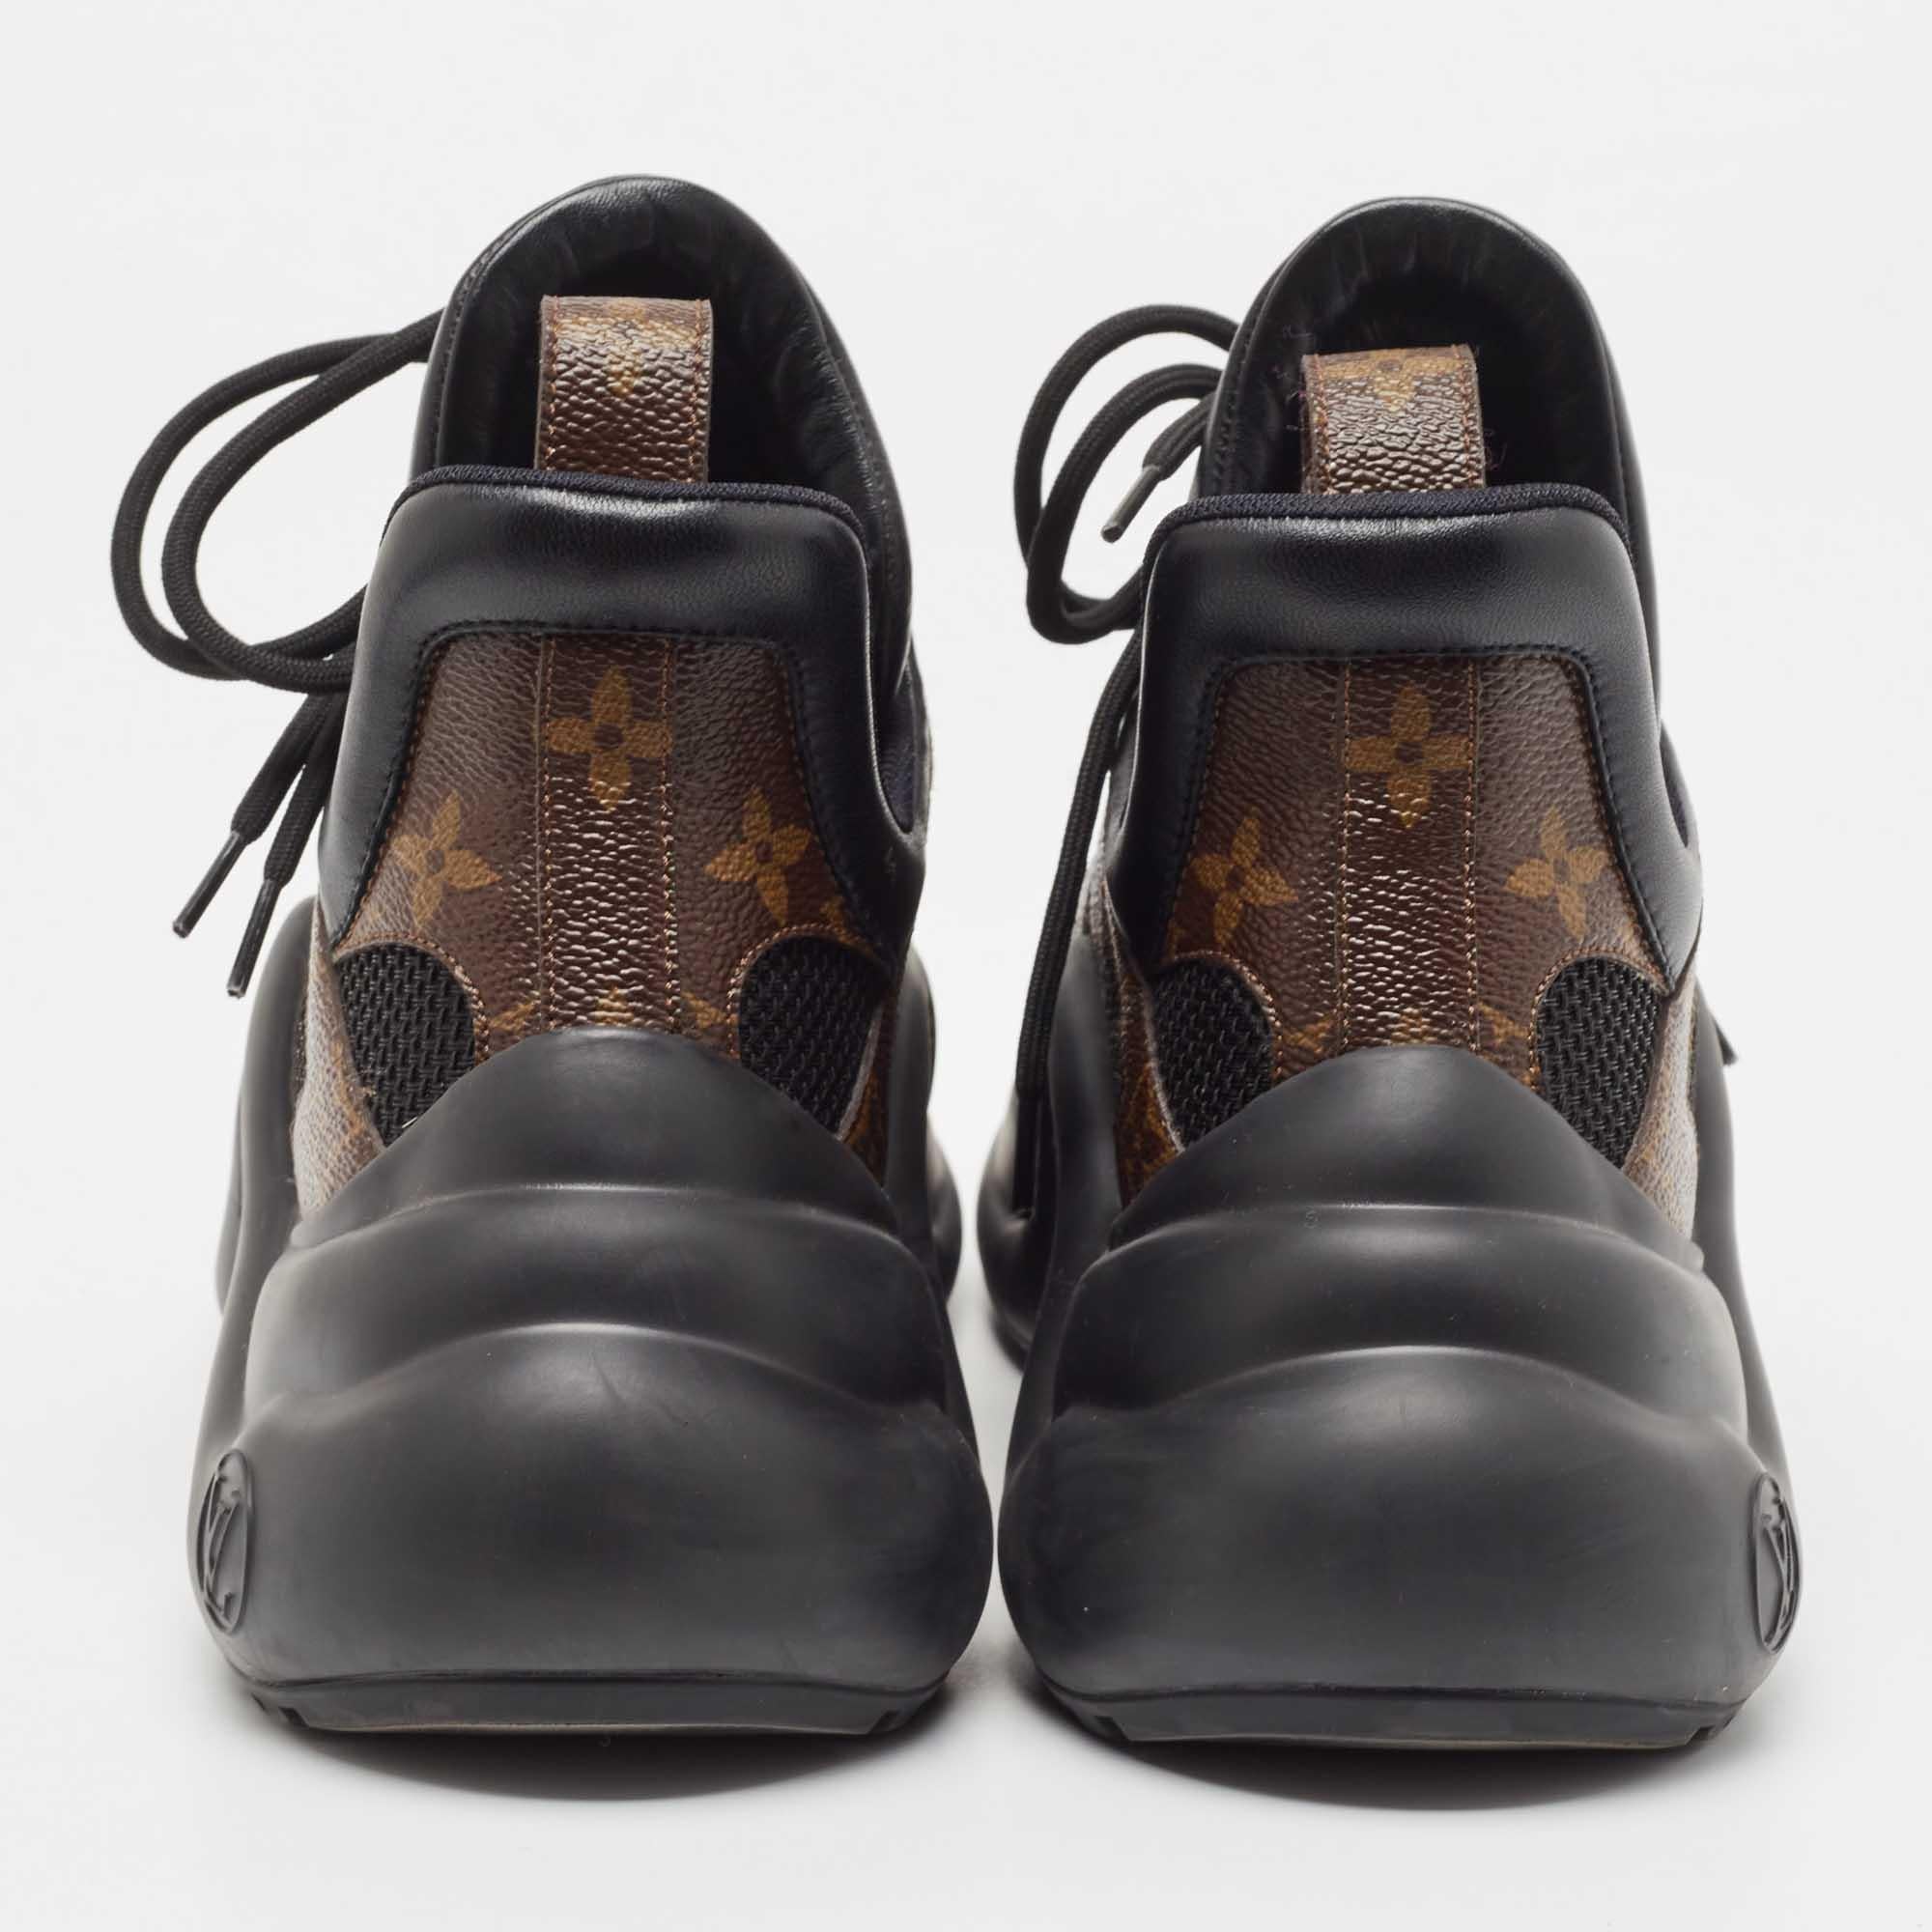 Louis Vuitton Black/Brown Nylon, Leather Archlight Sneakers Size 40 For Sale 1